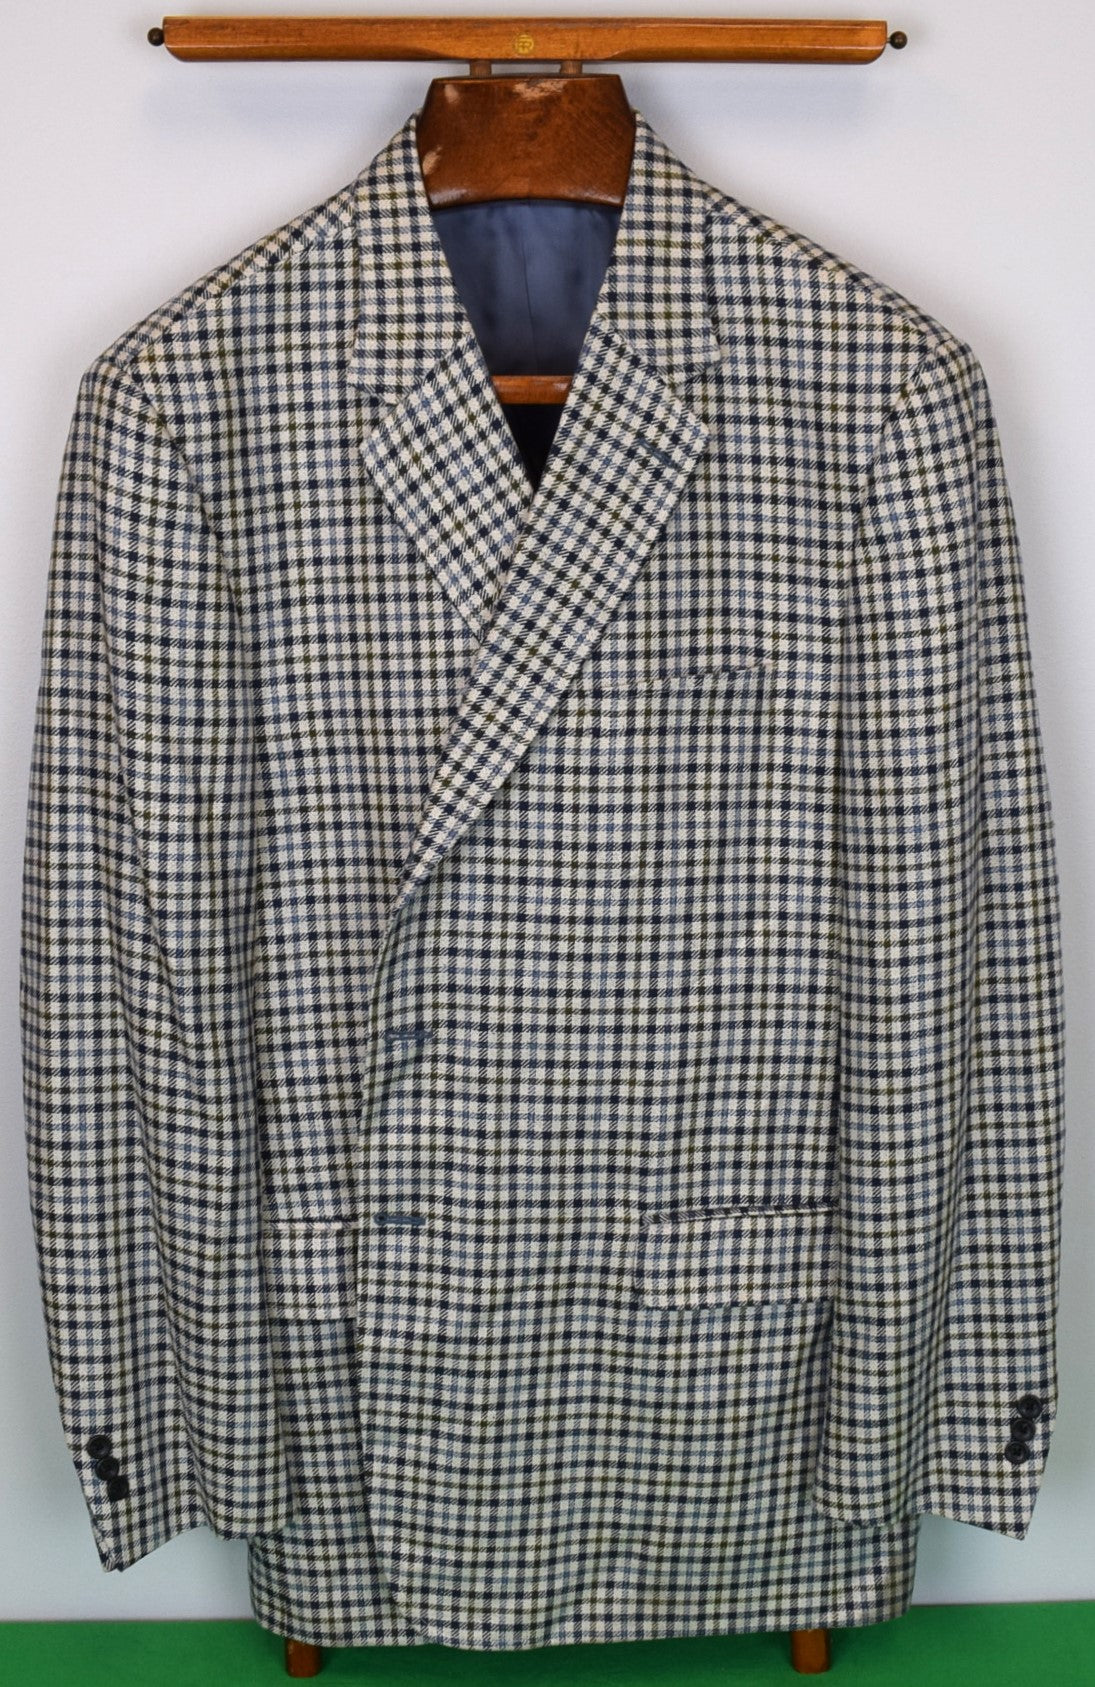 O'Connell's Silk Blue/ Olive Check Sport Coat Sz 48T (NWOT)